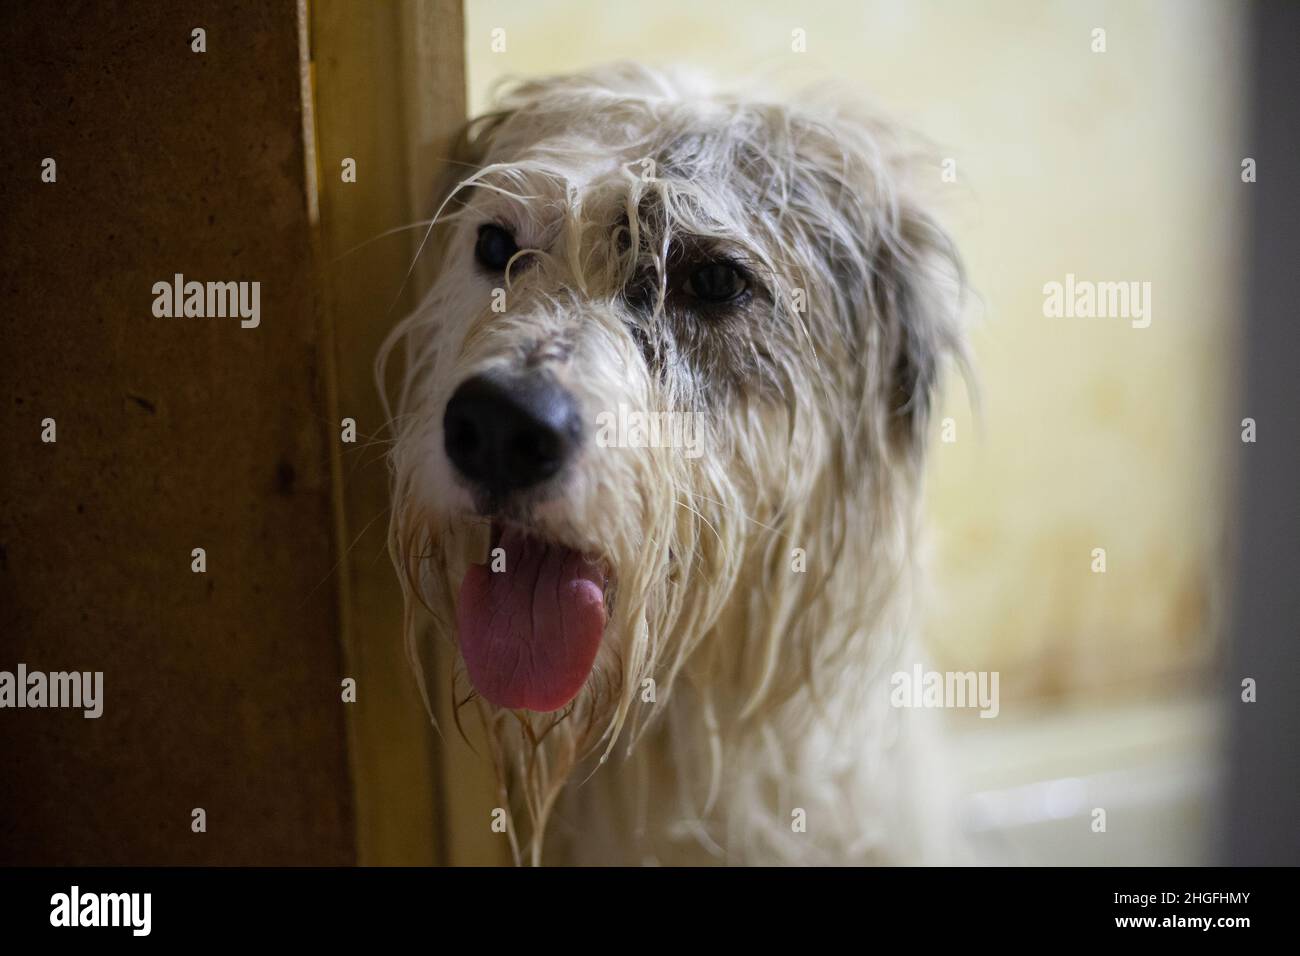 Dog after washing. A dog with long hair in the bathroom. The pet's muzzle is wet. The animal was washed. Stock Photo